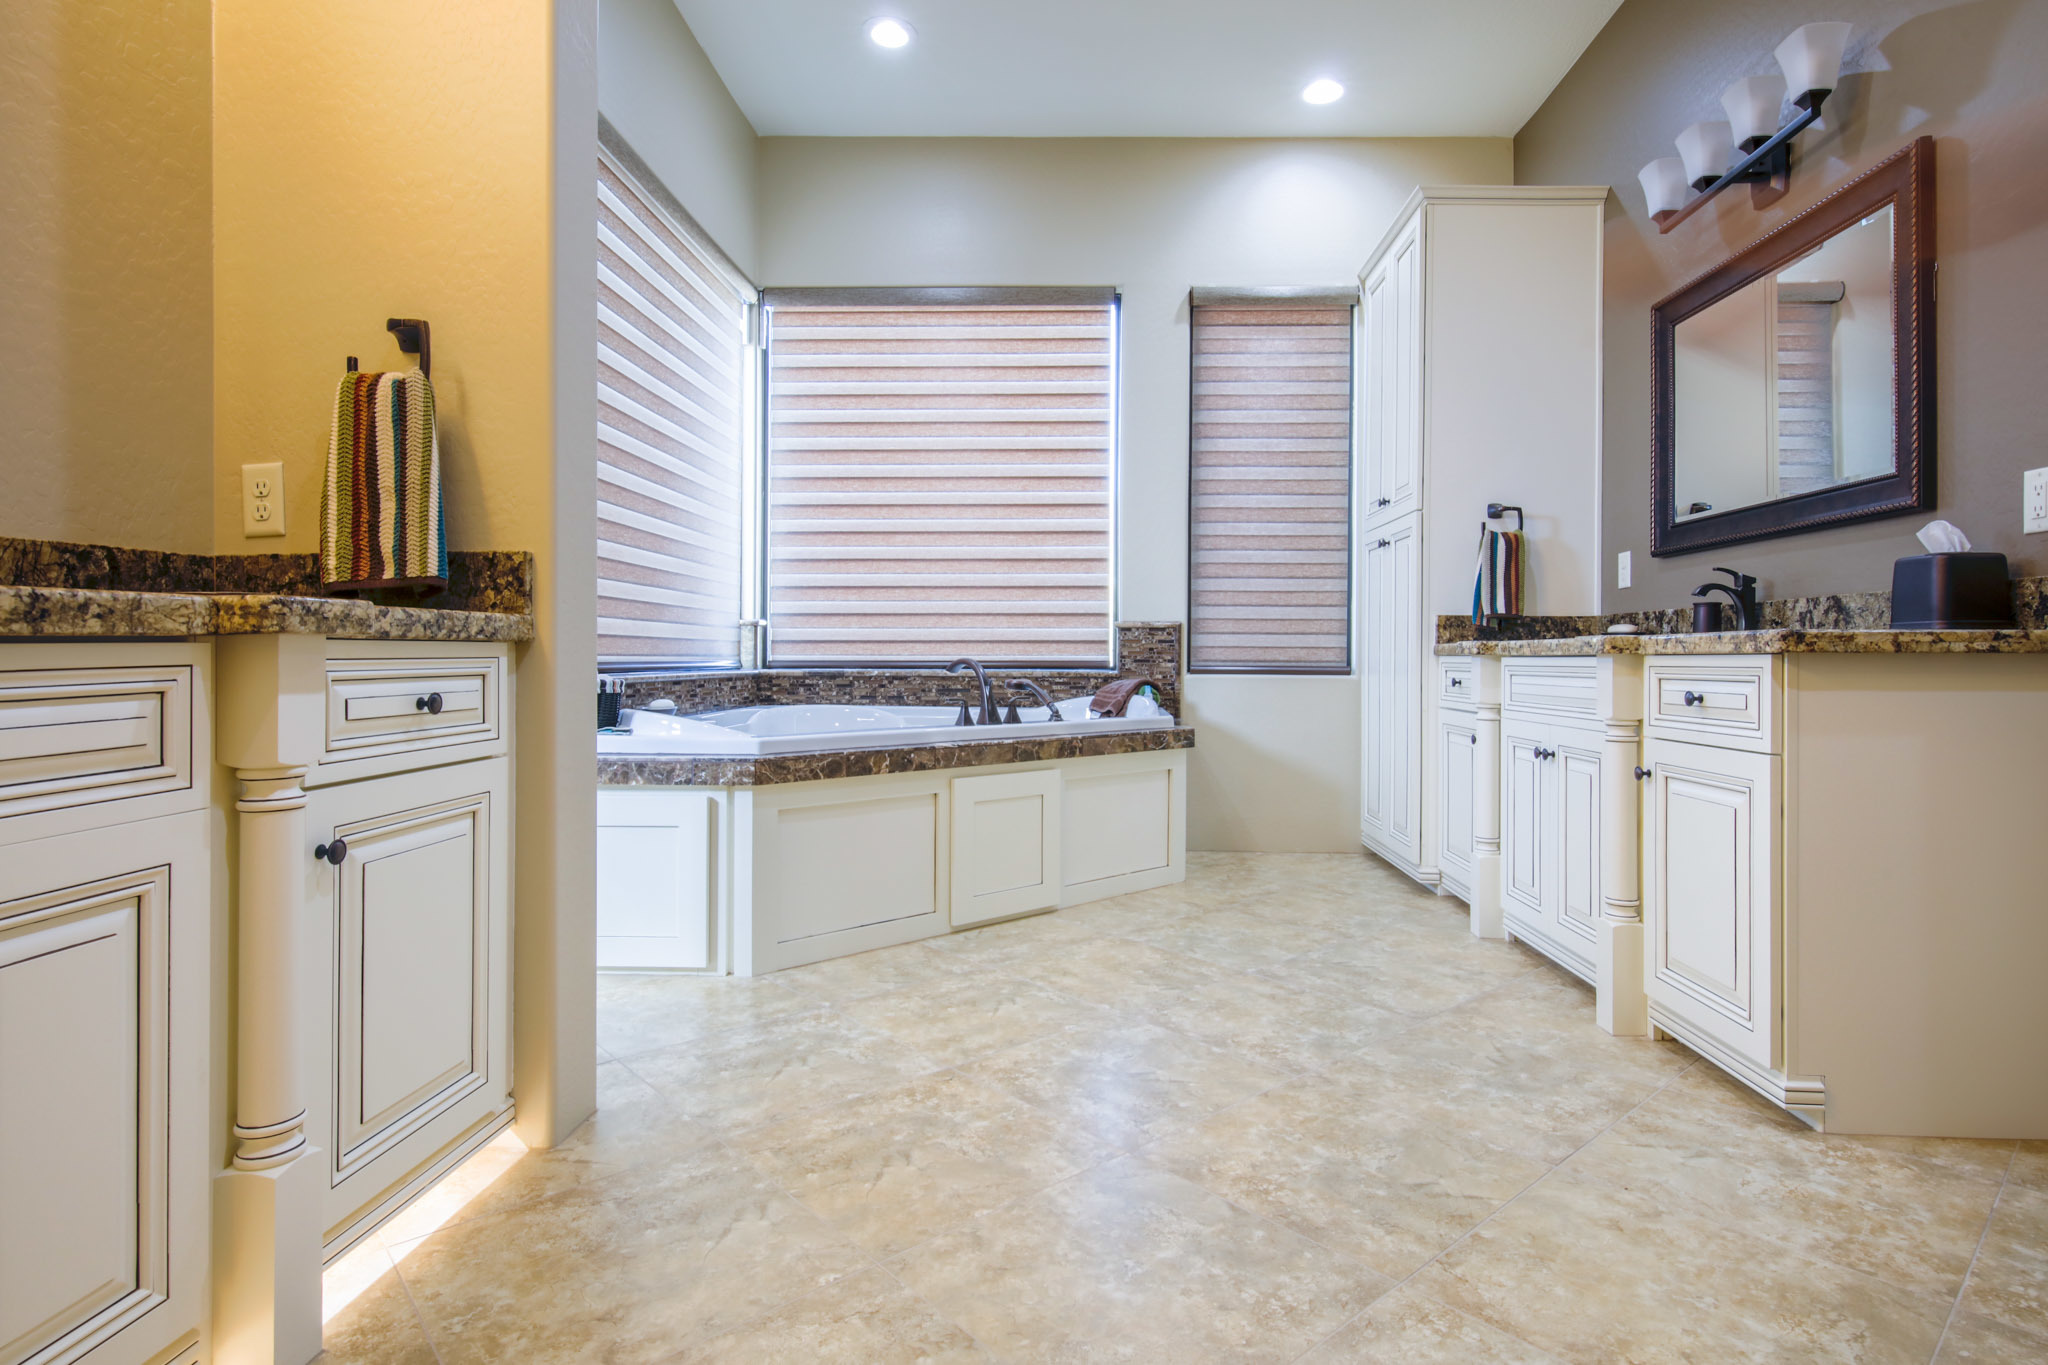 An Arizona bathroom remodel by Maverick Kitchens featuring Sollid cabinetry